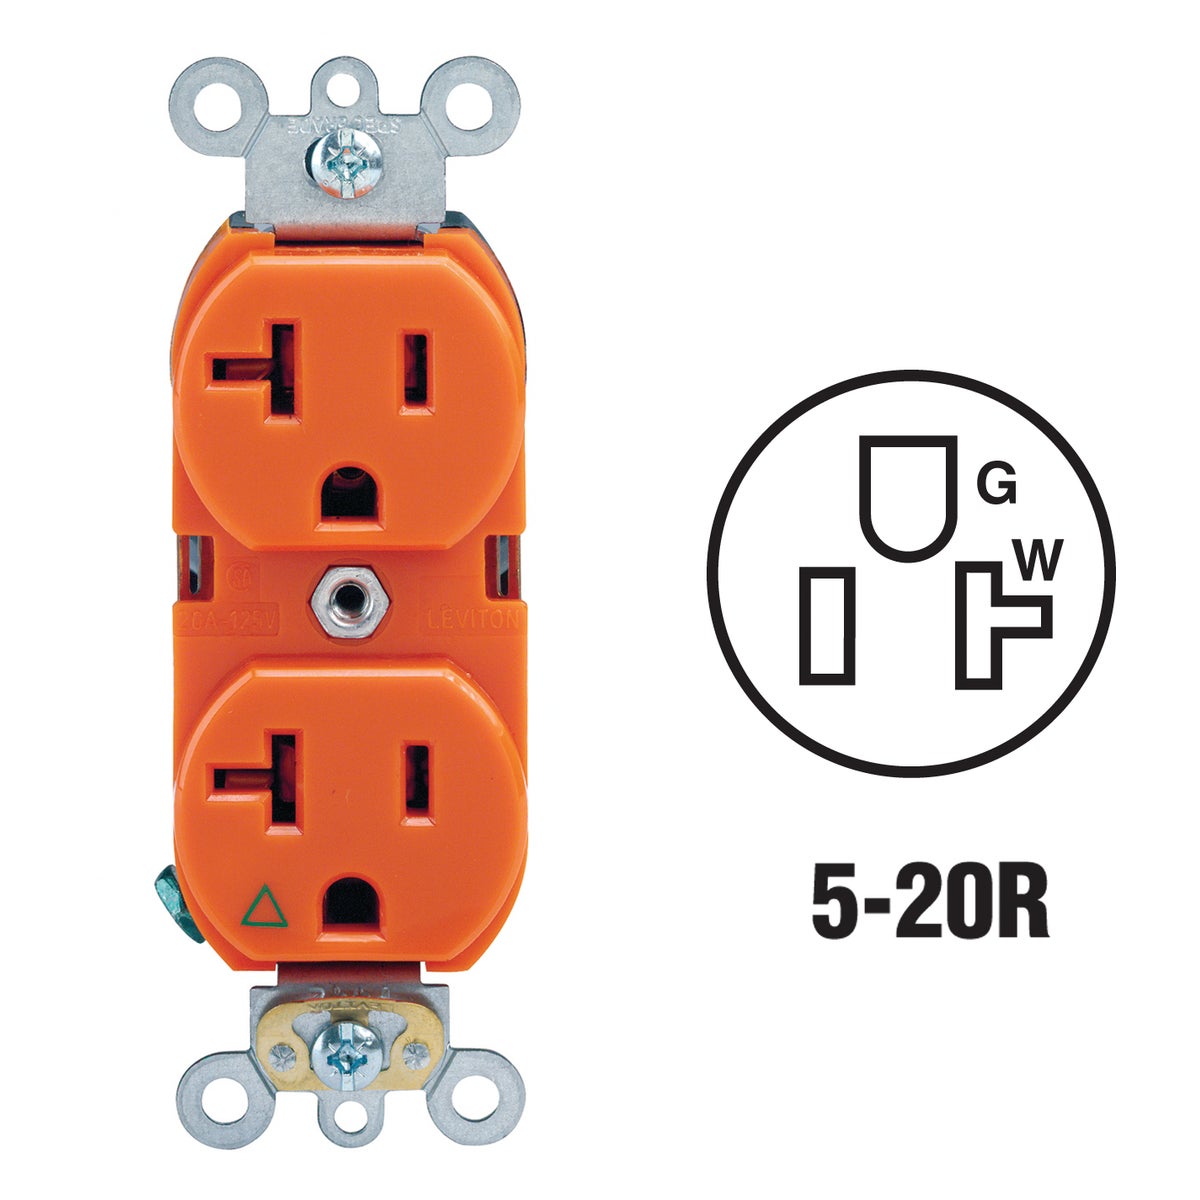 Item 518093, Industrial Specification Grade duplex outlet featuring a molded nylon body